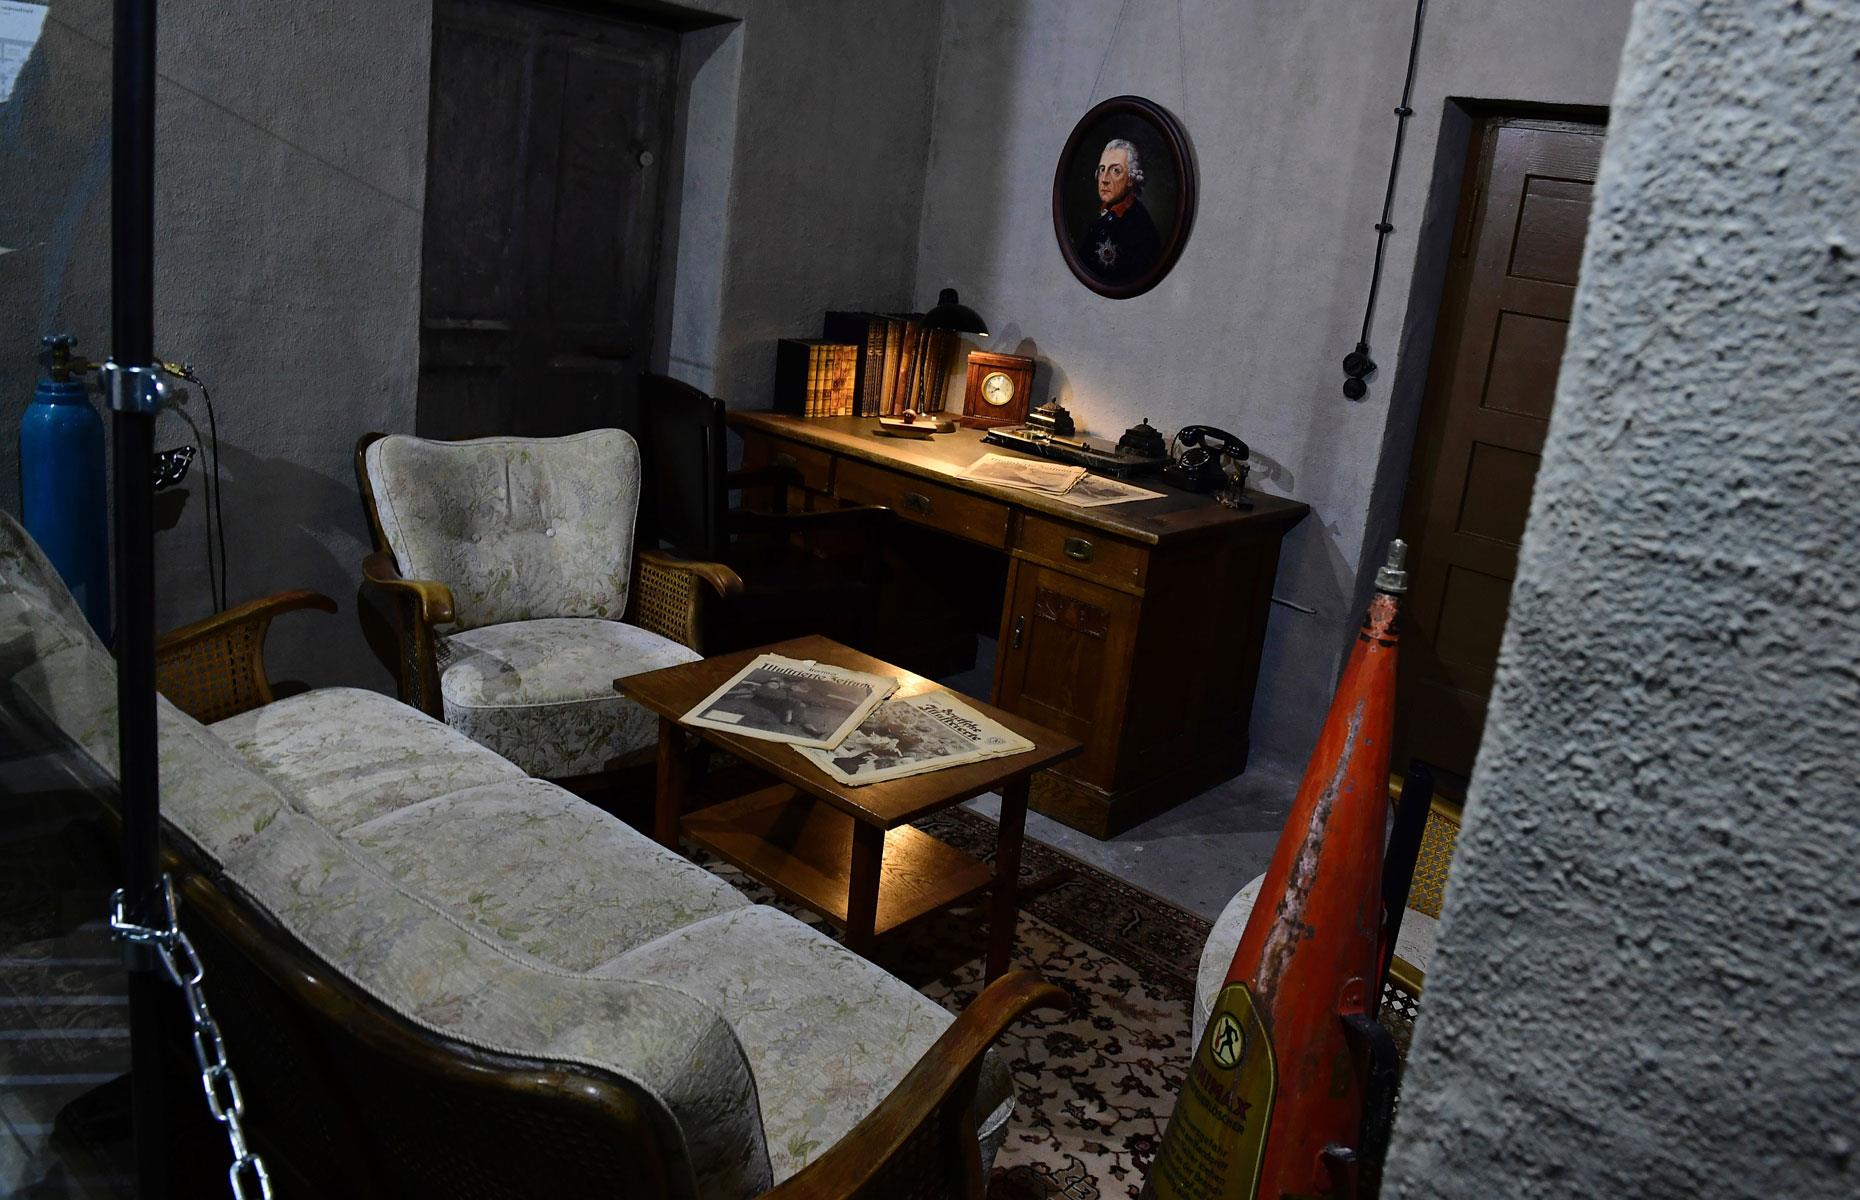 <p>This model of Hitler's study—the scene of their joint suicide—is on display in the Berlin Story museum. It was in this room that Eva Braun and Hitler both took cyanide capsules, and the Nazi leader also shot himself, on 30 April 1945. The couple were married in the bunker's map room the day before in a somber ceremony followed by an even gloomier reception, both aware of Soviet troops drawing ever closer.</p>